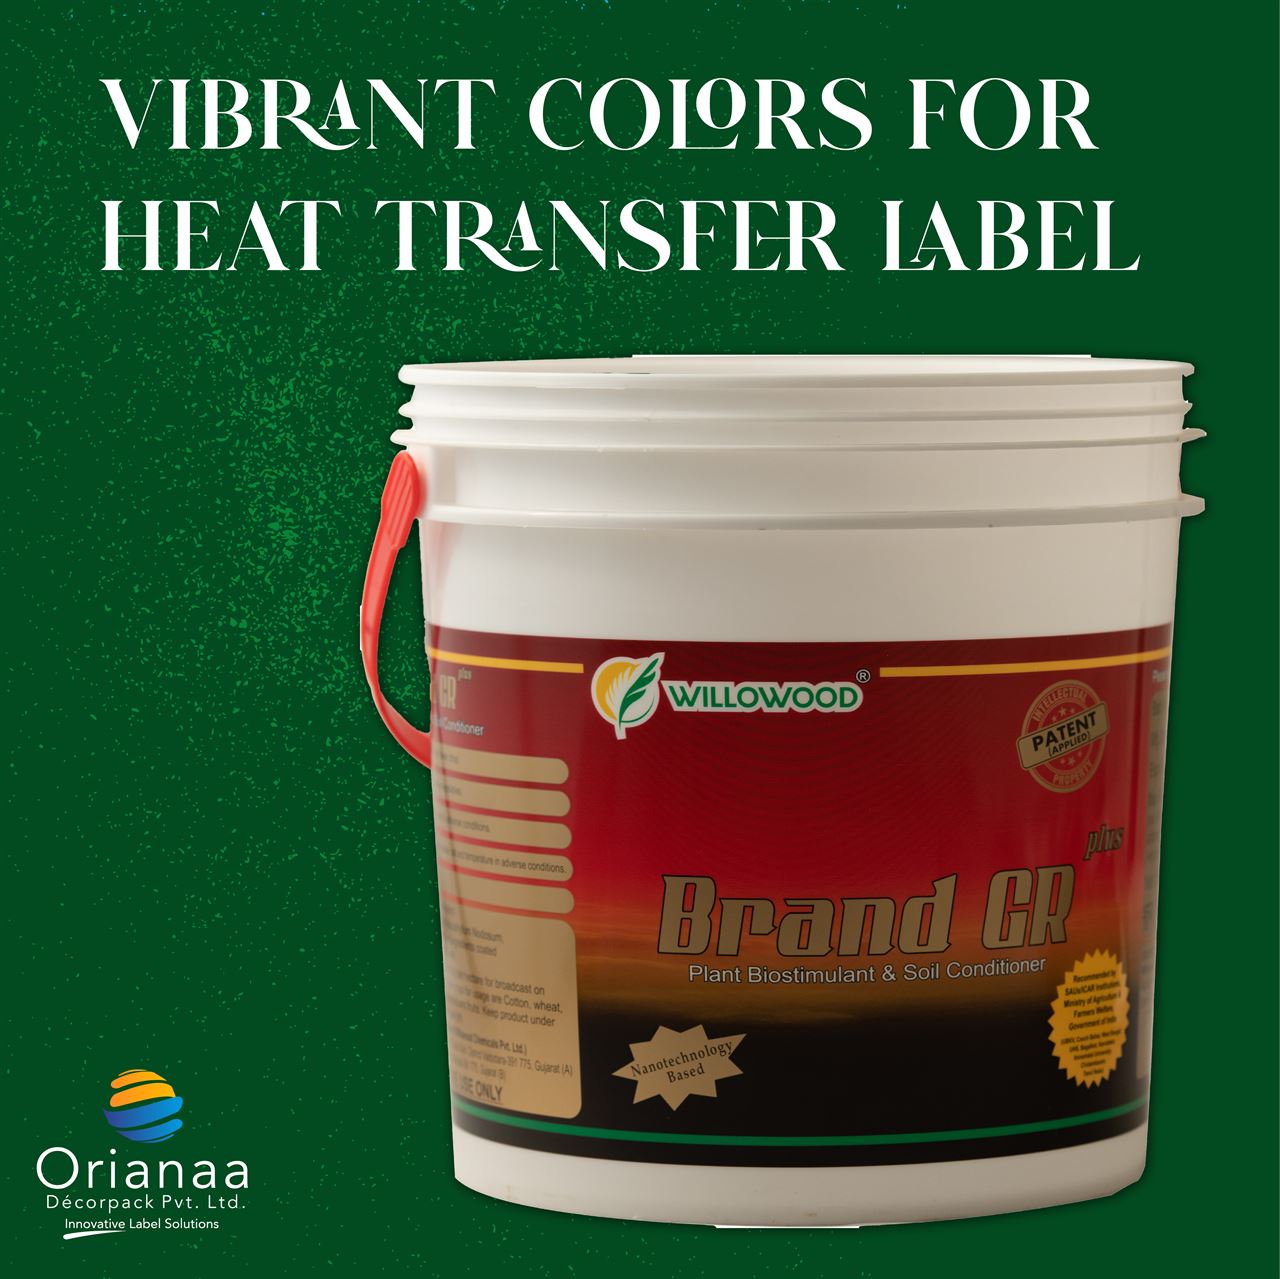 Vibrant Colours for Heat Transfer Label Solution- Orianaa Decorpack